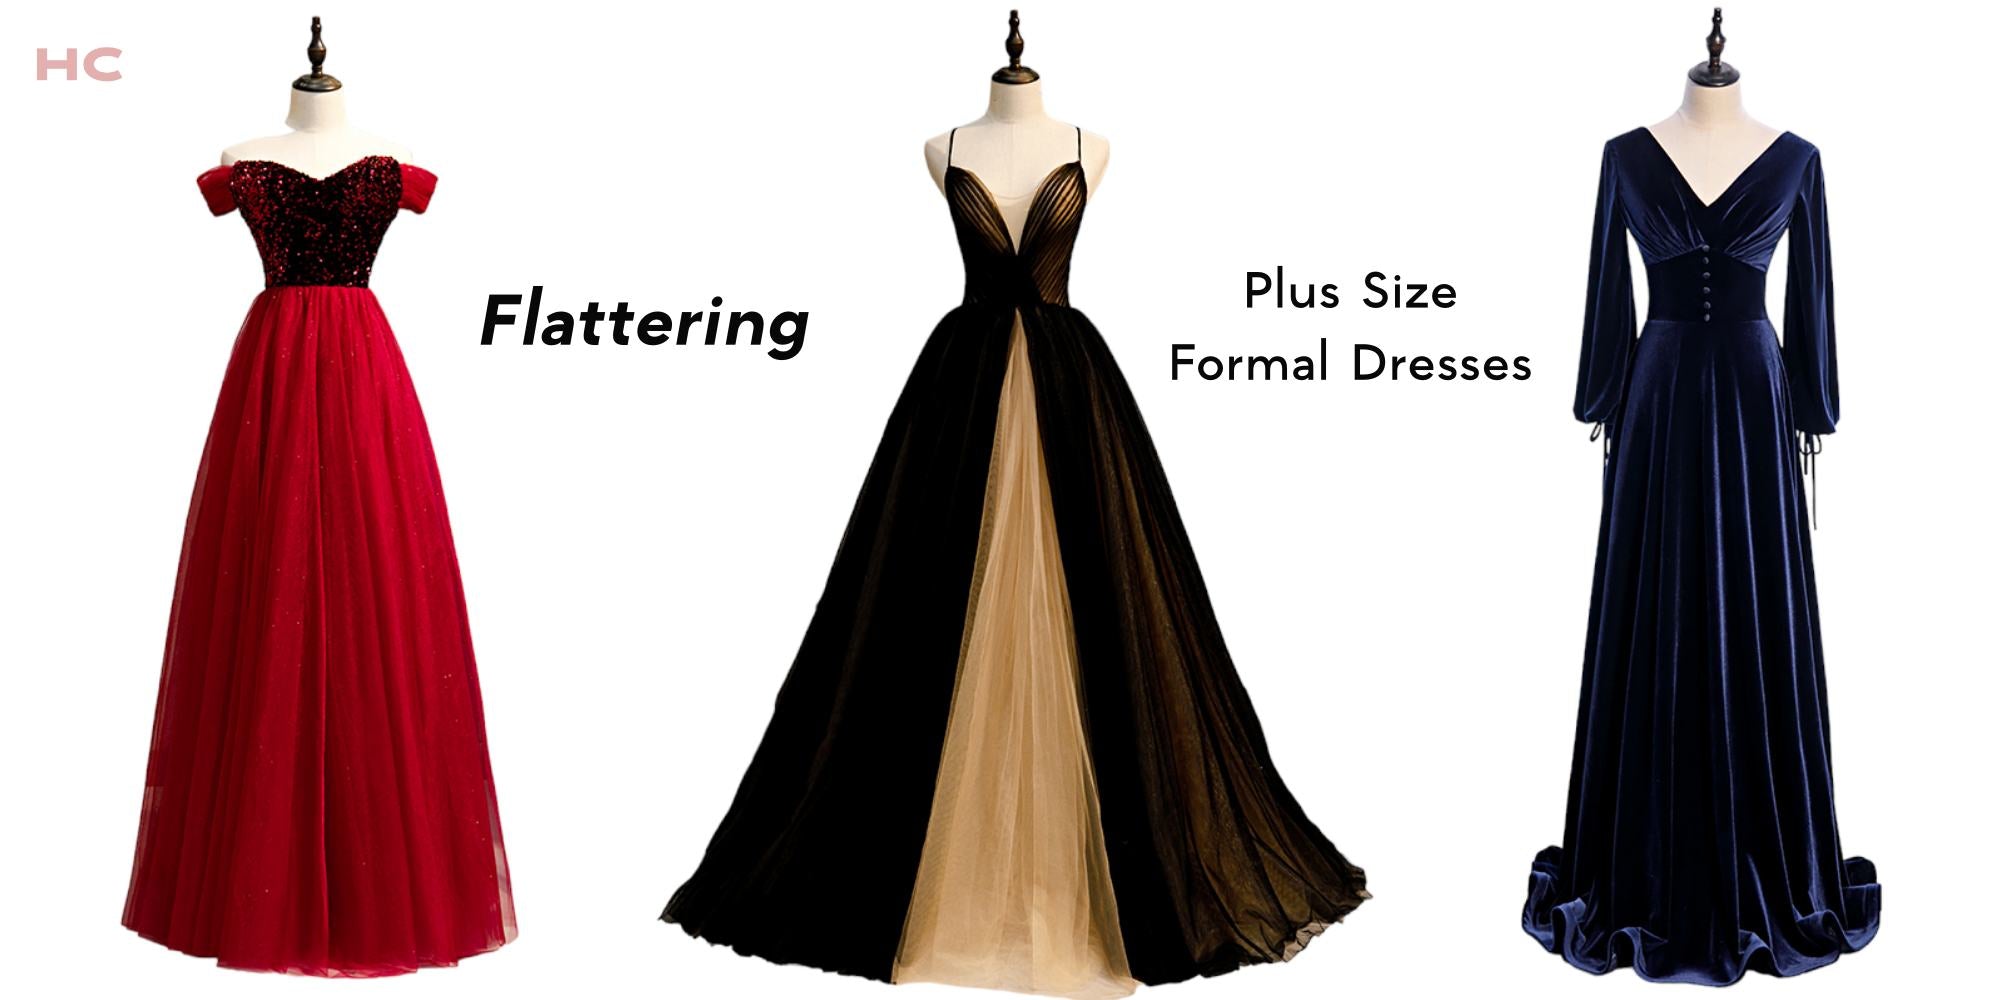 Empowering Every Body: Plus-Size Formal Dresses That Flatter Every Curve